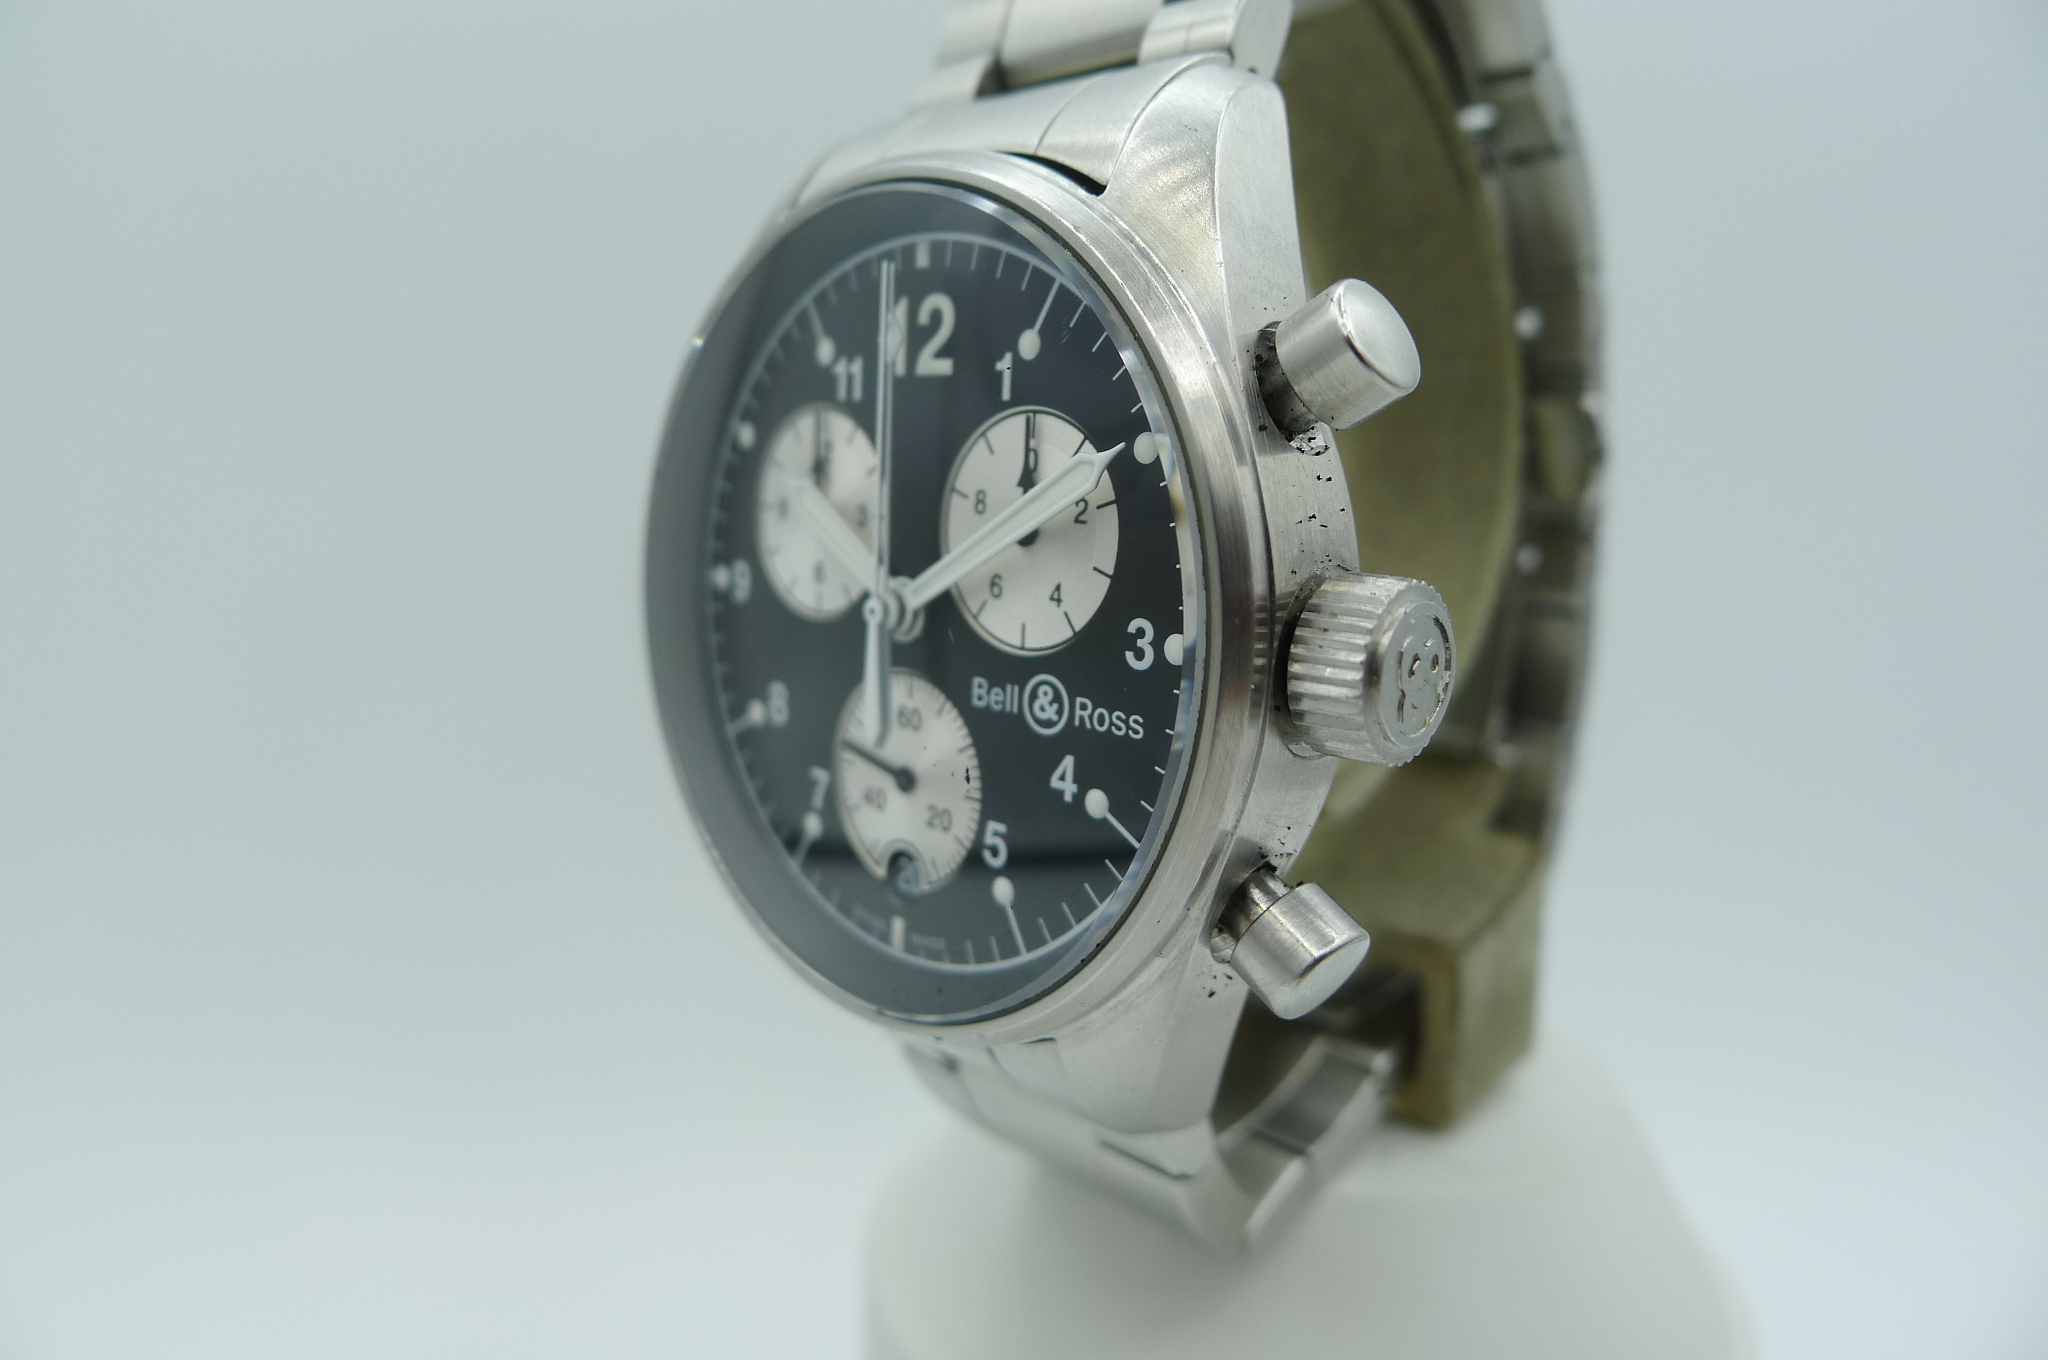 BELL & ROSS VINTAGE 120 CHRONOGRAPH – Militare Watch